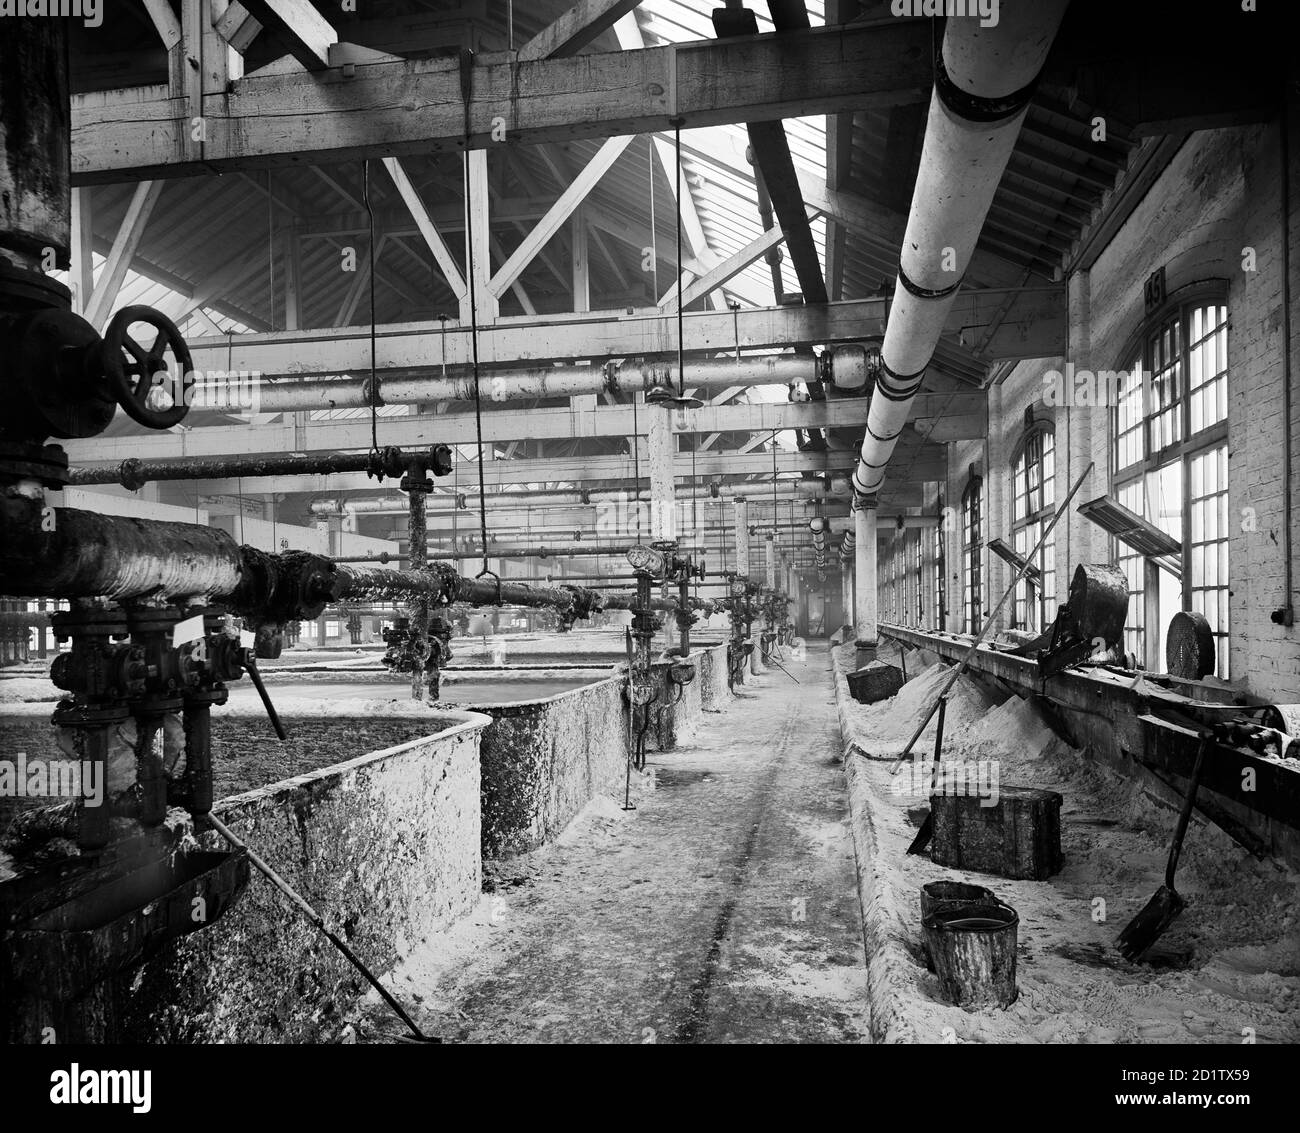 LEVER BROTHERS SUNLIGHT SOAP WORKS, Port Sunlight, Wirral, Merseyside. Interior view. Photographed  by Bedford Lemere & Co. in April 1897. Stock Photo